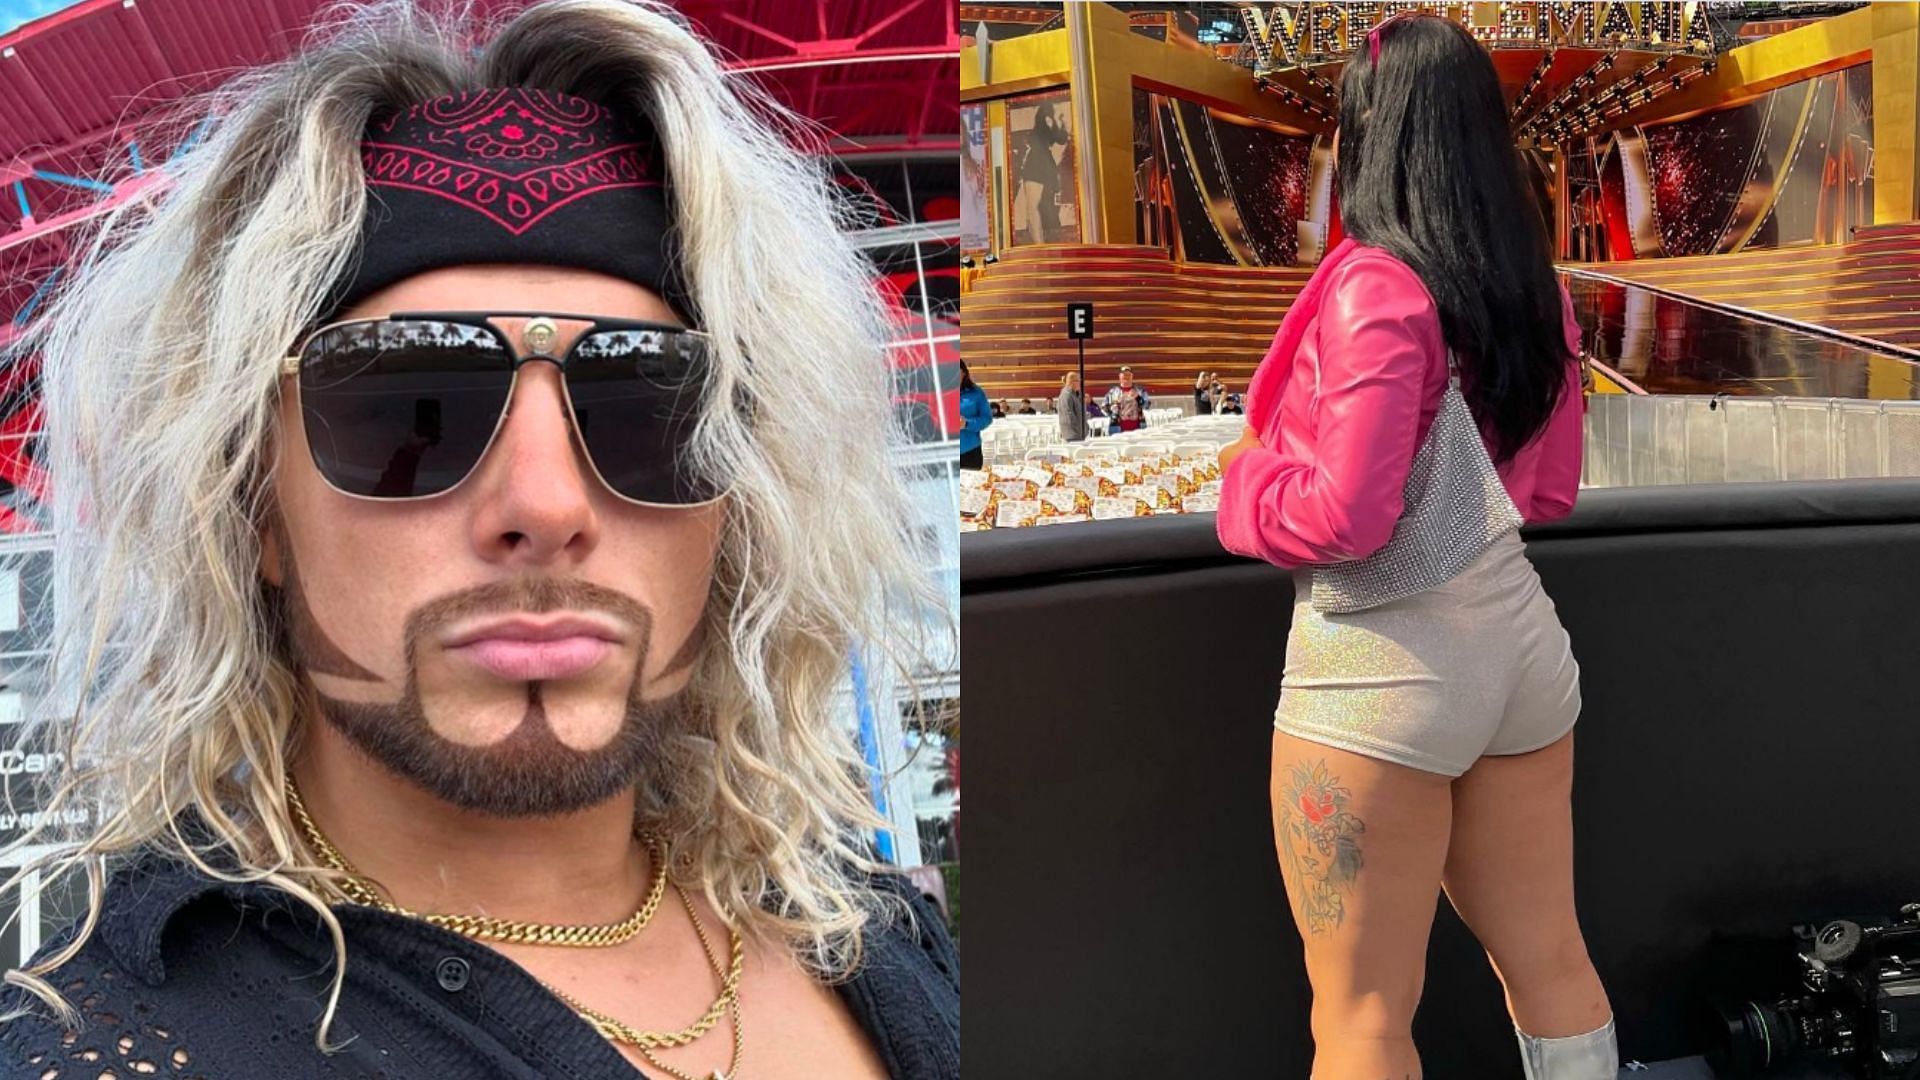 Lexis King and his girlfriend, who was recently released from WWE.